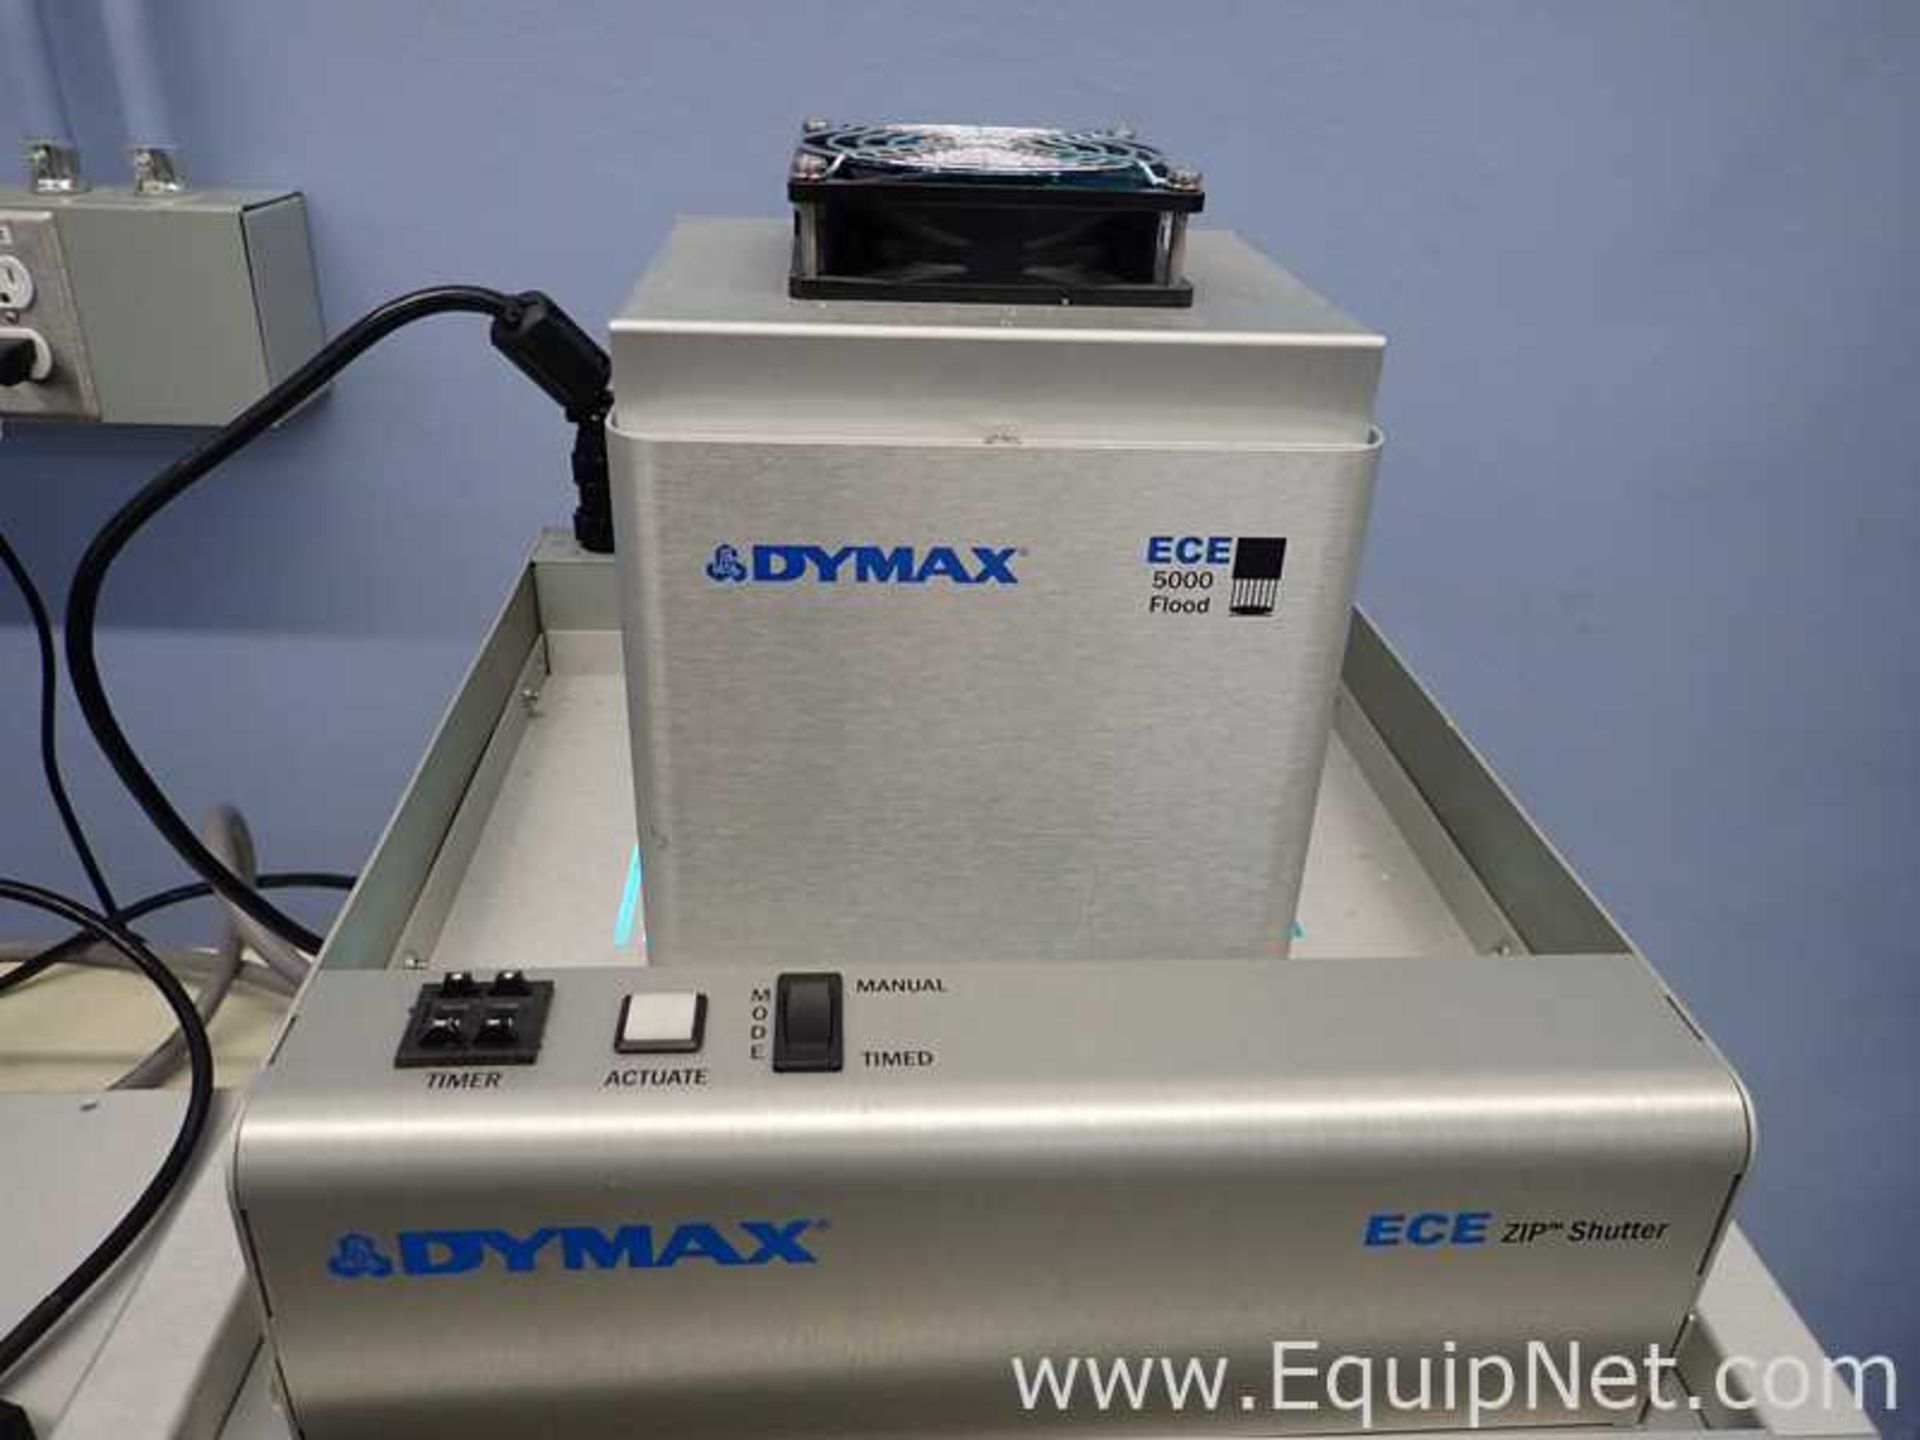 Dymax ECE Series UV Light-Curing Flood Lamp Systems - Image 10 of 31